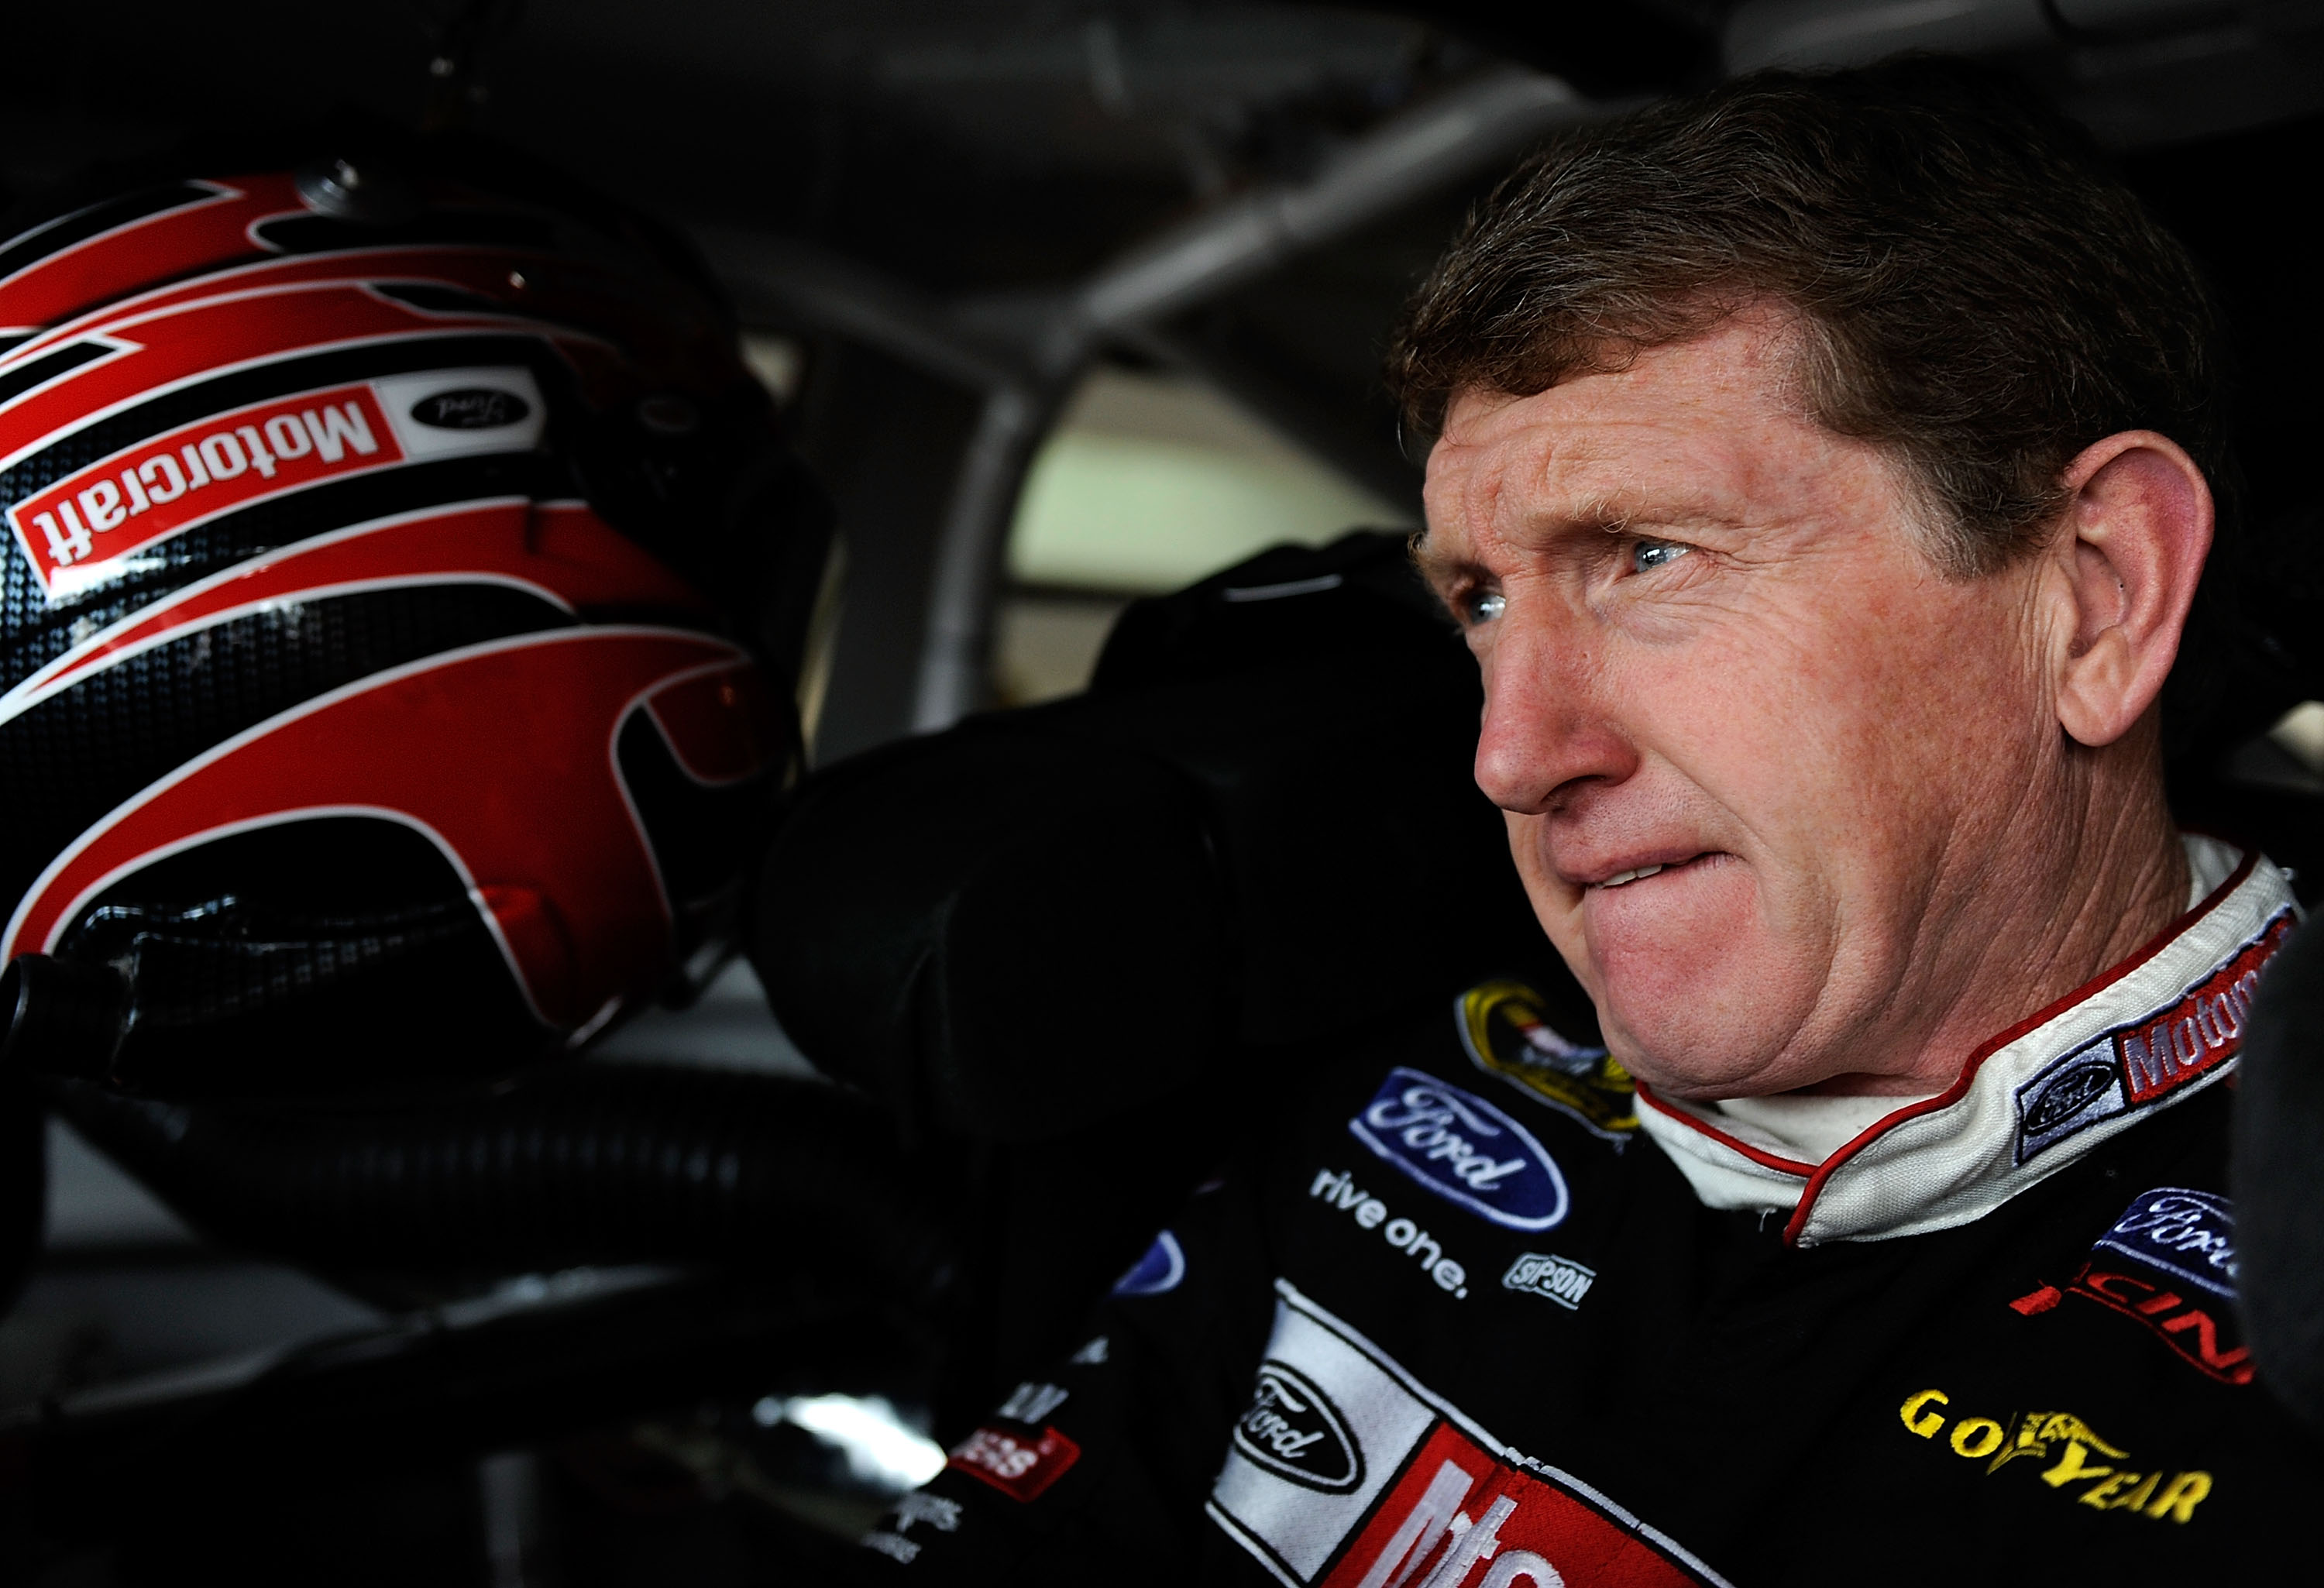 HAMPTON, GA - MARCH 07: Bill Elliott, driver of the #21 Motorcraft Ford prepares to drive during practice for the NASCAR Sprint Cup Series Kobalt Tools 500 at the Atlanta Motor Speedway on March 7, 2009 in Hampton, Georgia. (Photo by Rusty Jarrett/Getty I